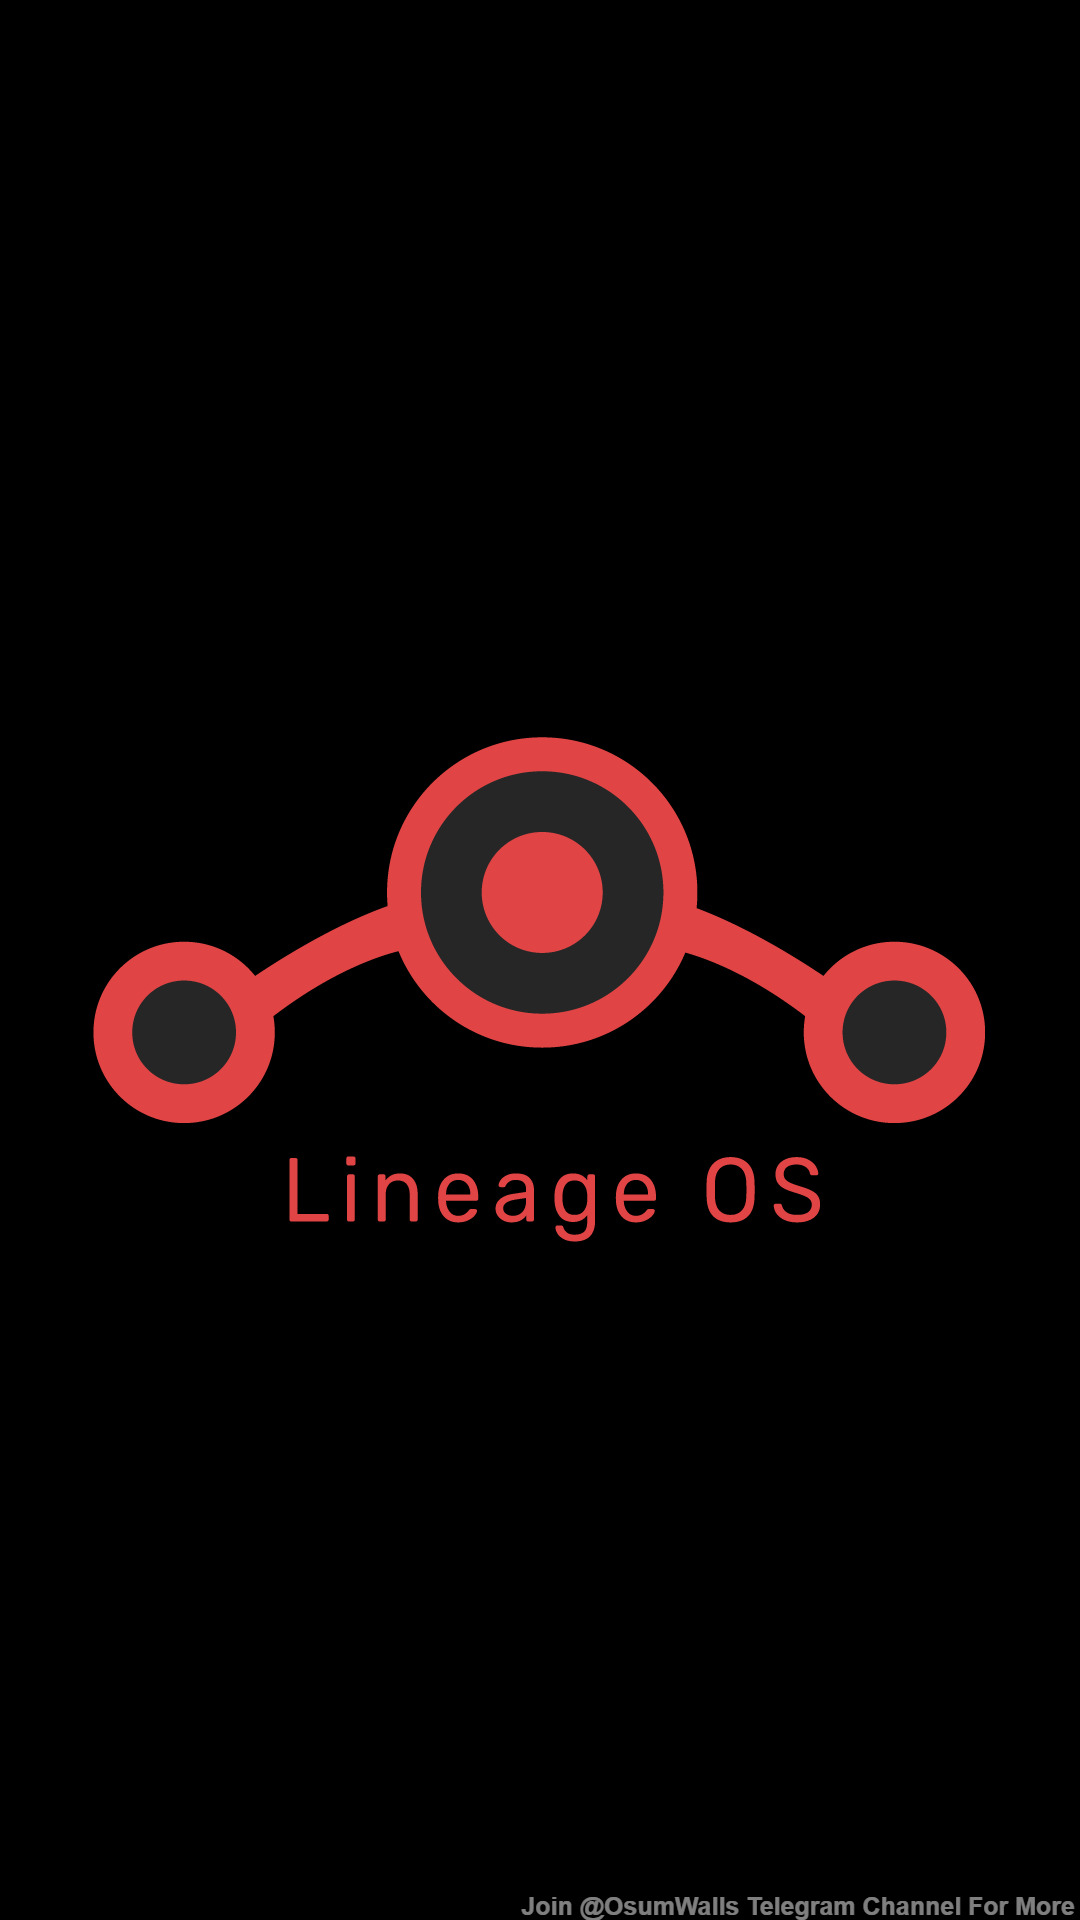 Lineage OS, Android (operating system), Simple background, Minimalism Wallpaper